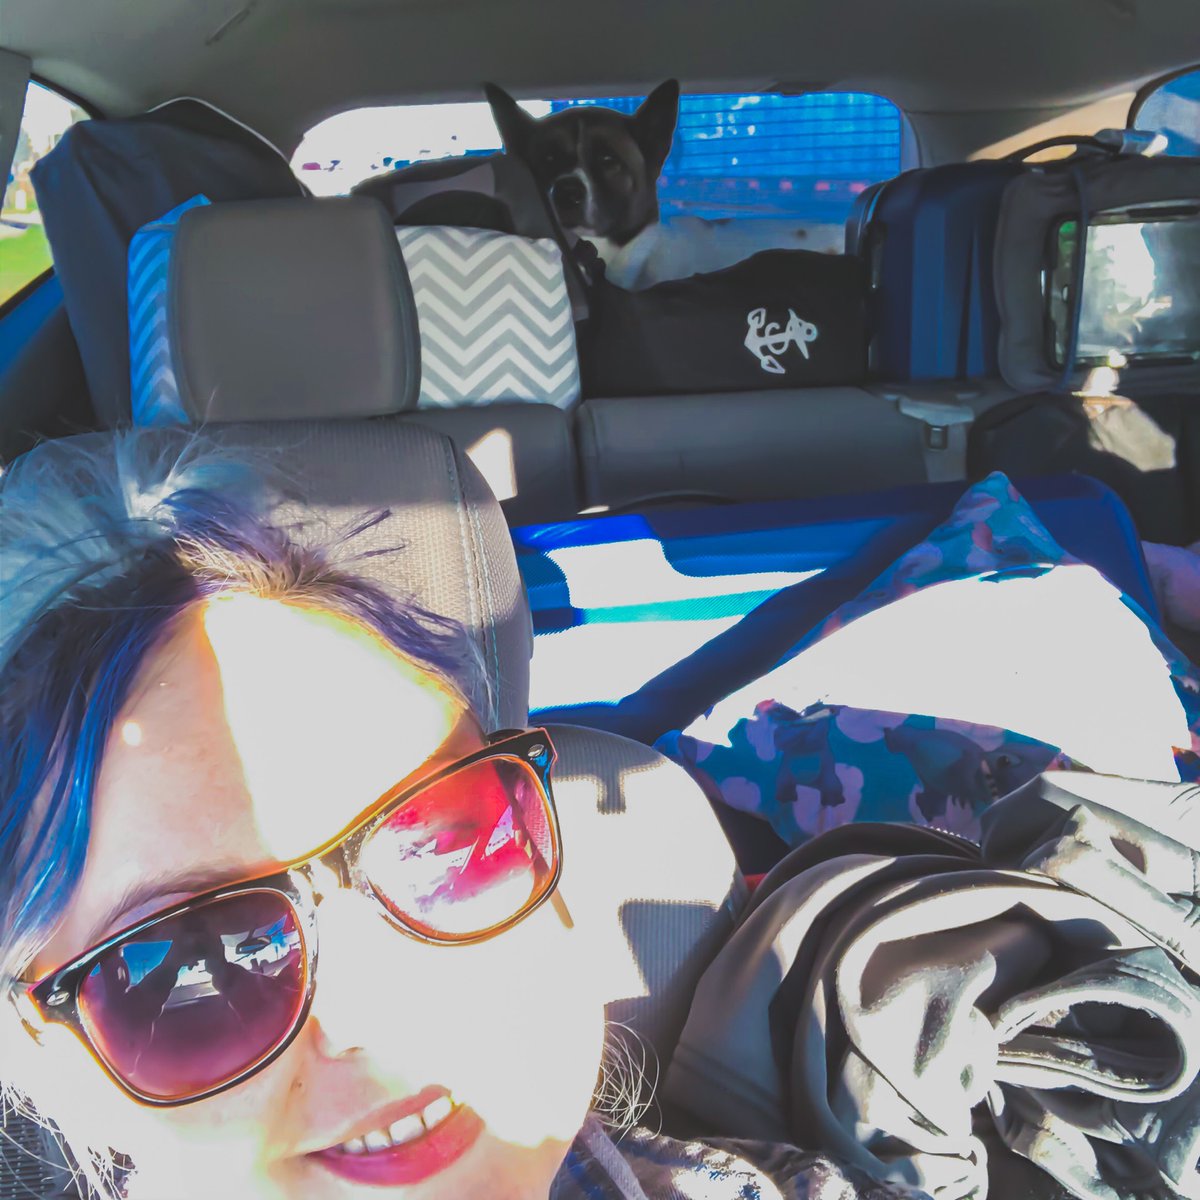 Feels like the #BarberBearFamily is constantly on the road! Me, Riley, and the pups are ready to stay home for a few weeks. ❤️ #homesweethome #travel #youtubemusic #musician #singersongwriter #texasartists #femaleartists #roadtripwarriors